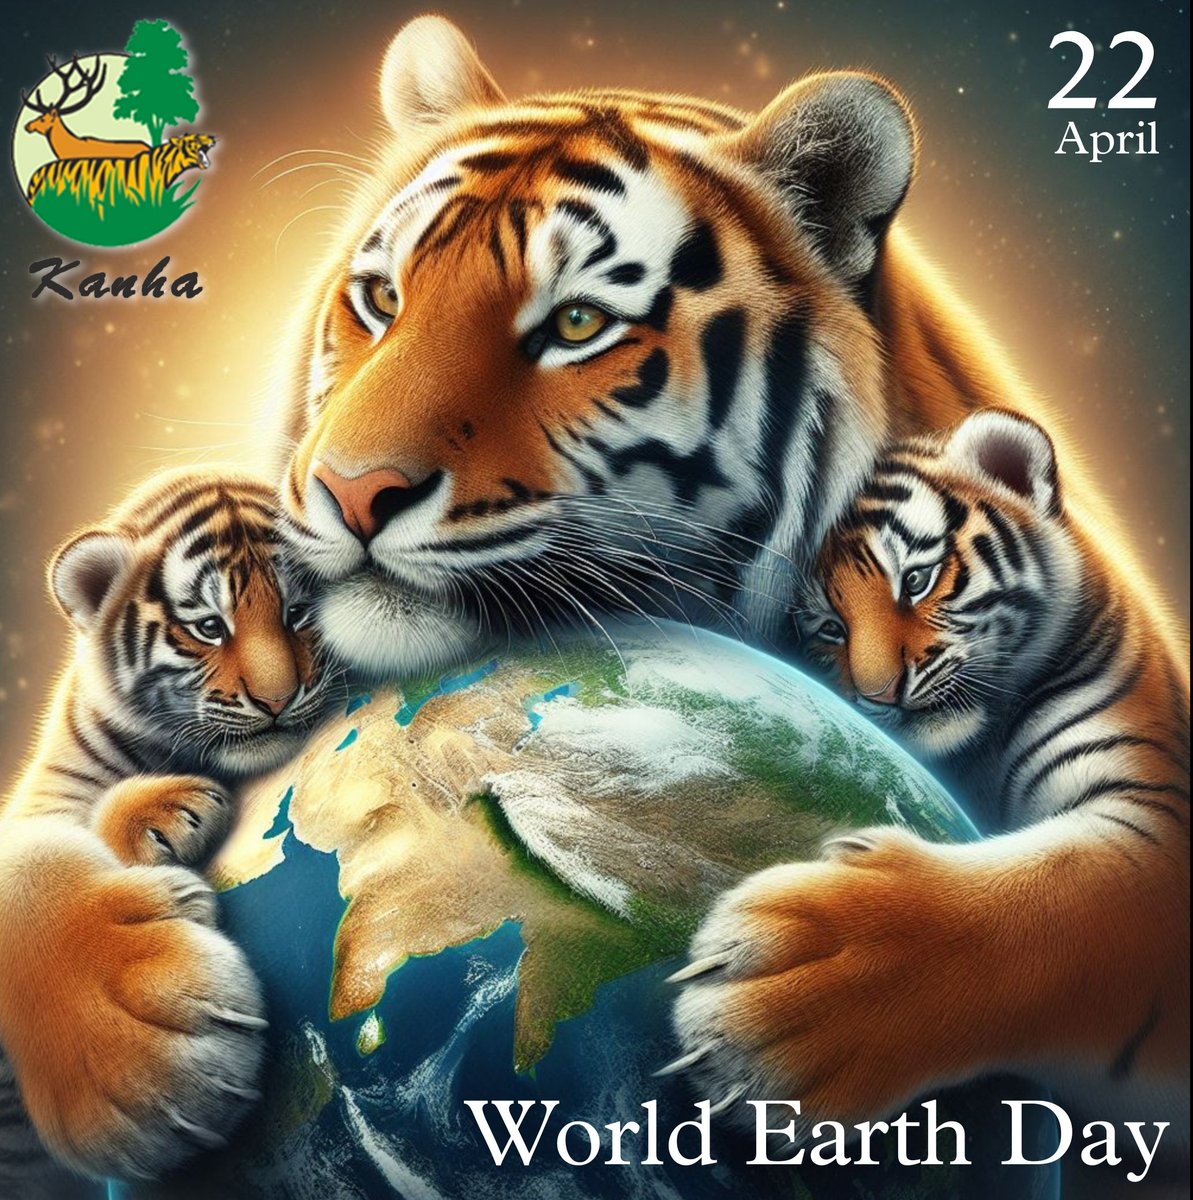 'Amidst the lush canopy of our forests, tigers stand as guardians of biodiversity. On #WorldEarthDay, let's pledge to protect these majestic creatures and the ecosystems they call home. 🌍🐅 #Conservation #Biodiversity'